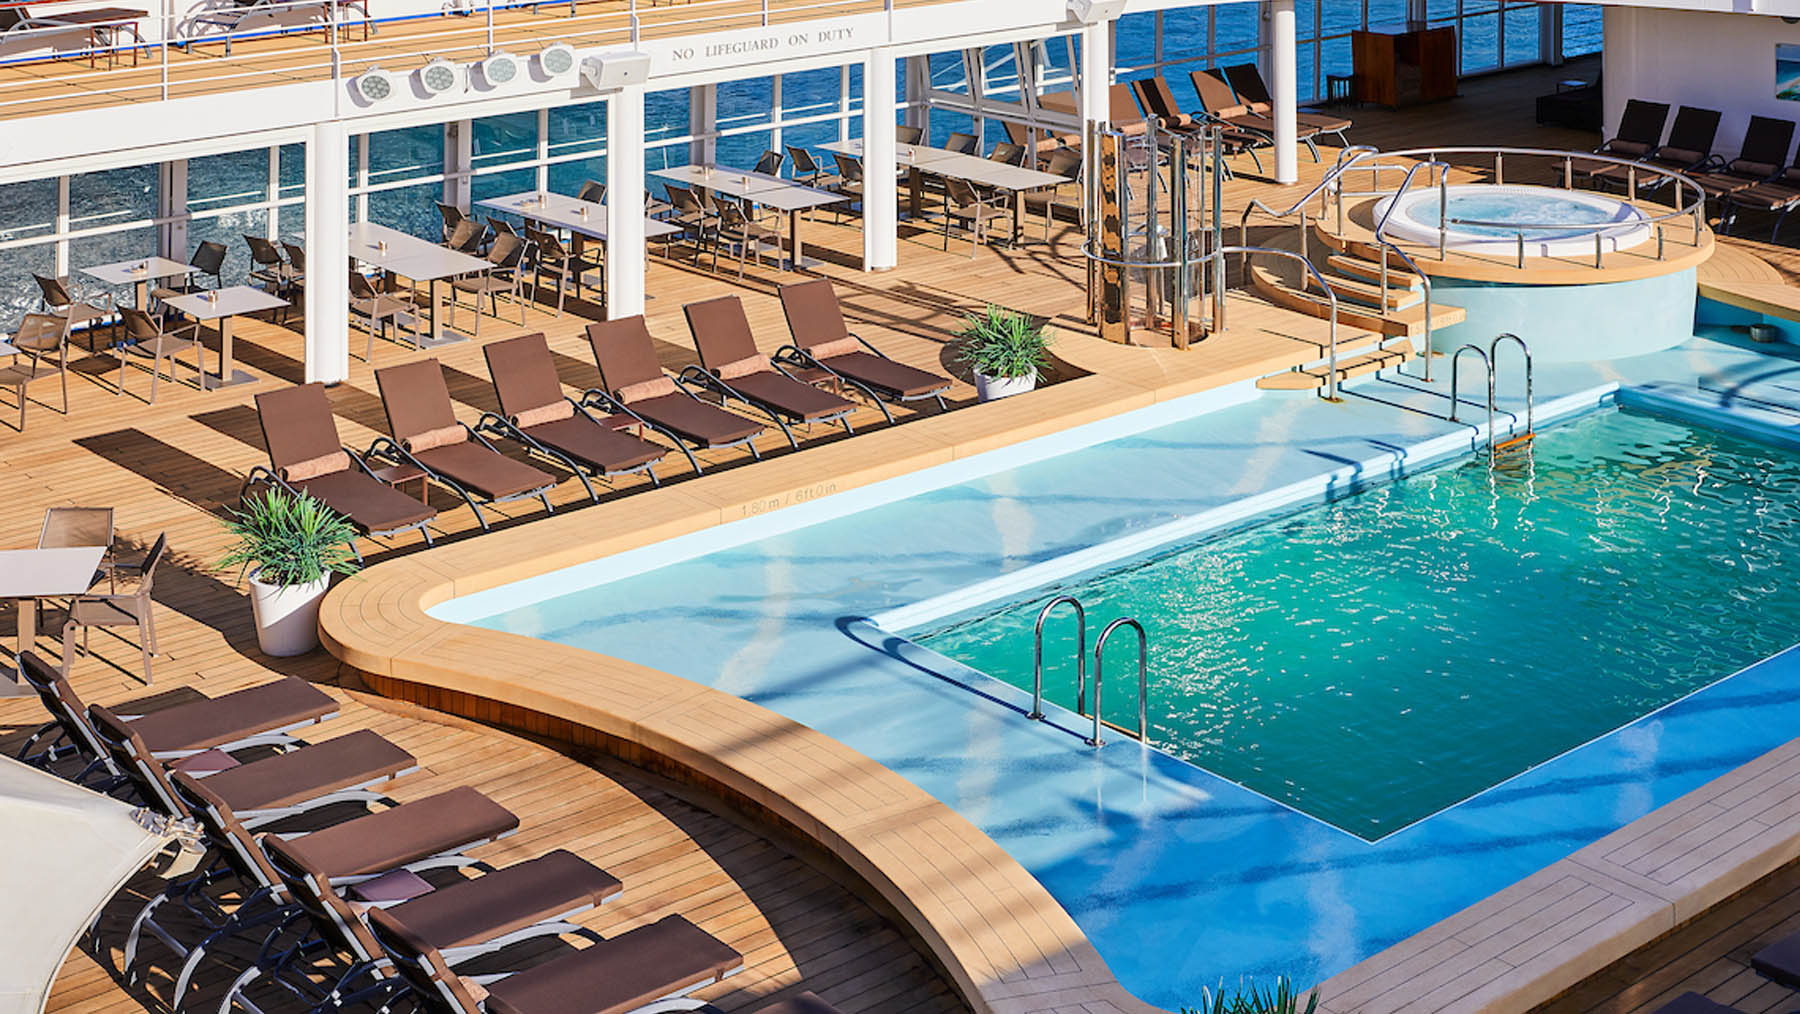 This ultra-luxurious pool is one of the amenities aboard 